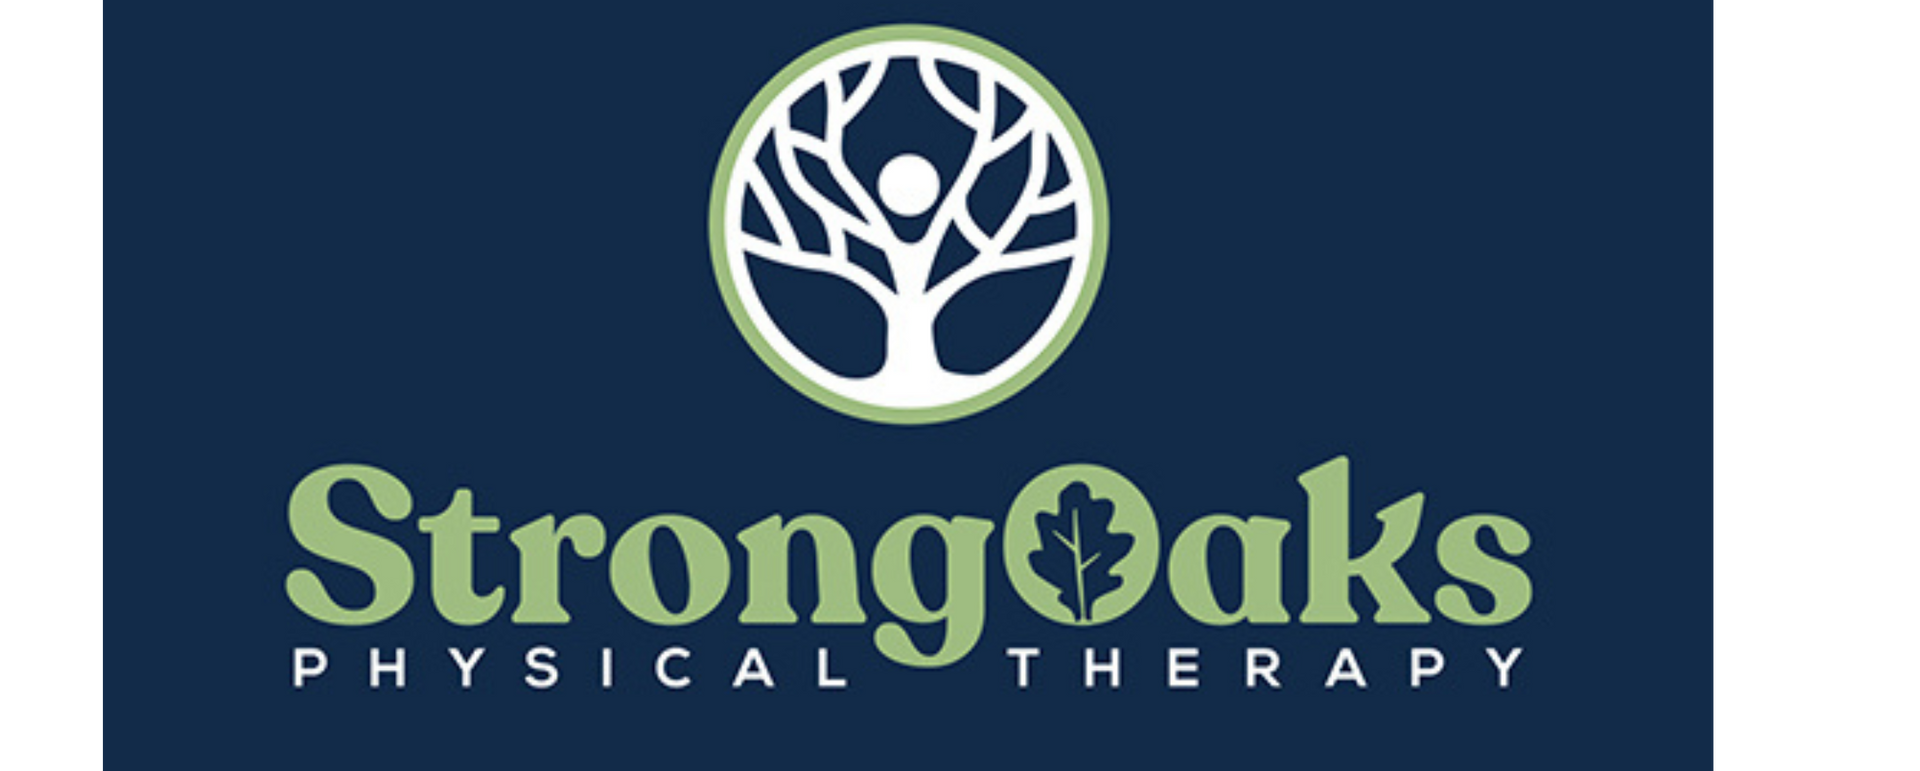 Strong Oak Physical Therapy logo